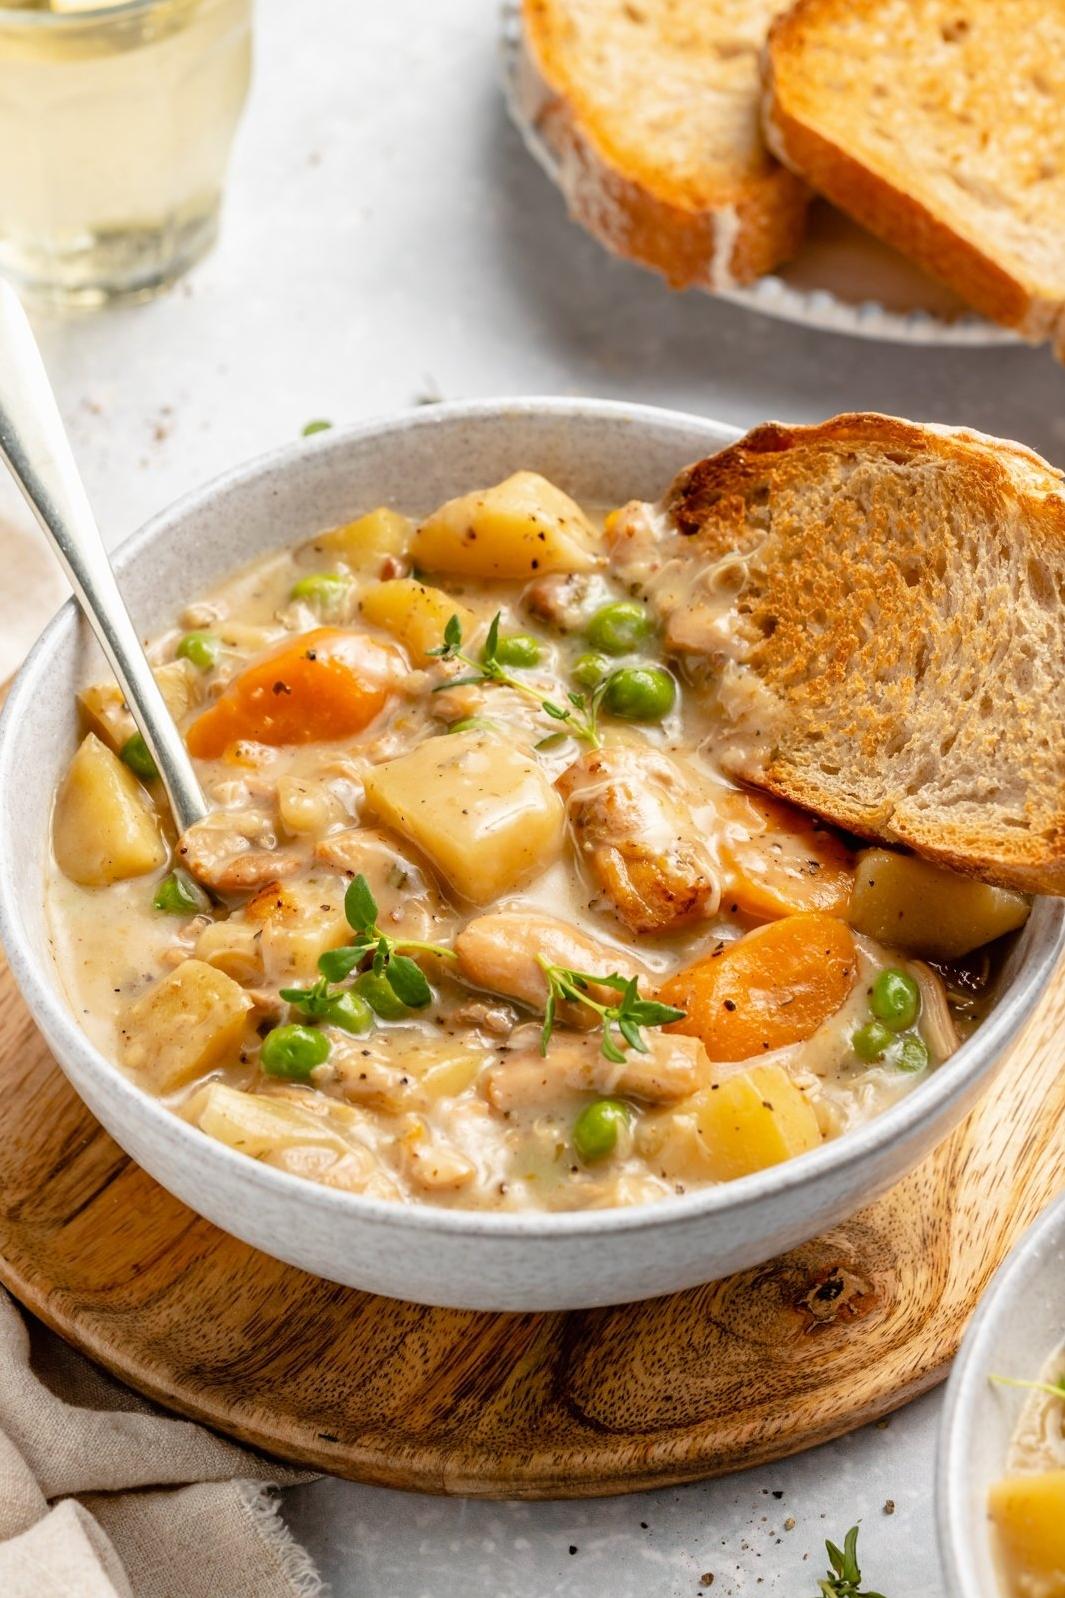  Hot and hearty chicken stew with a delicate white wine flavor